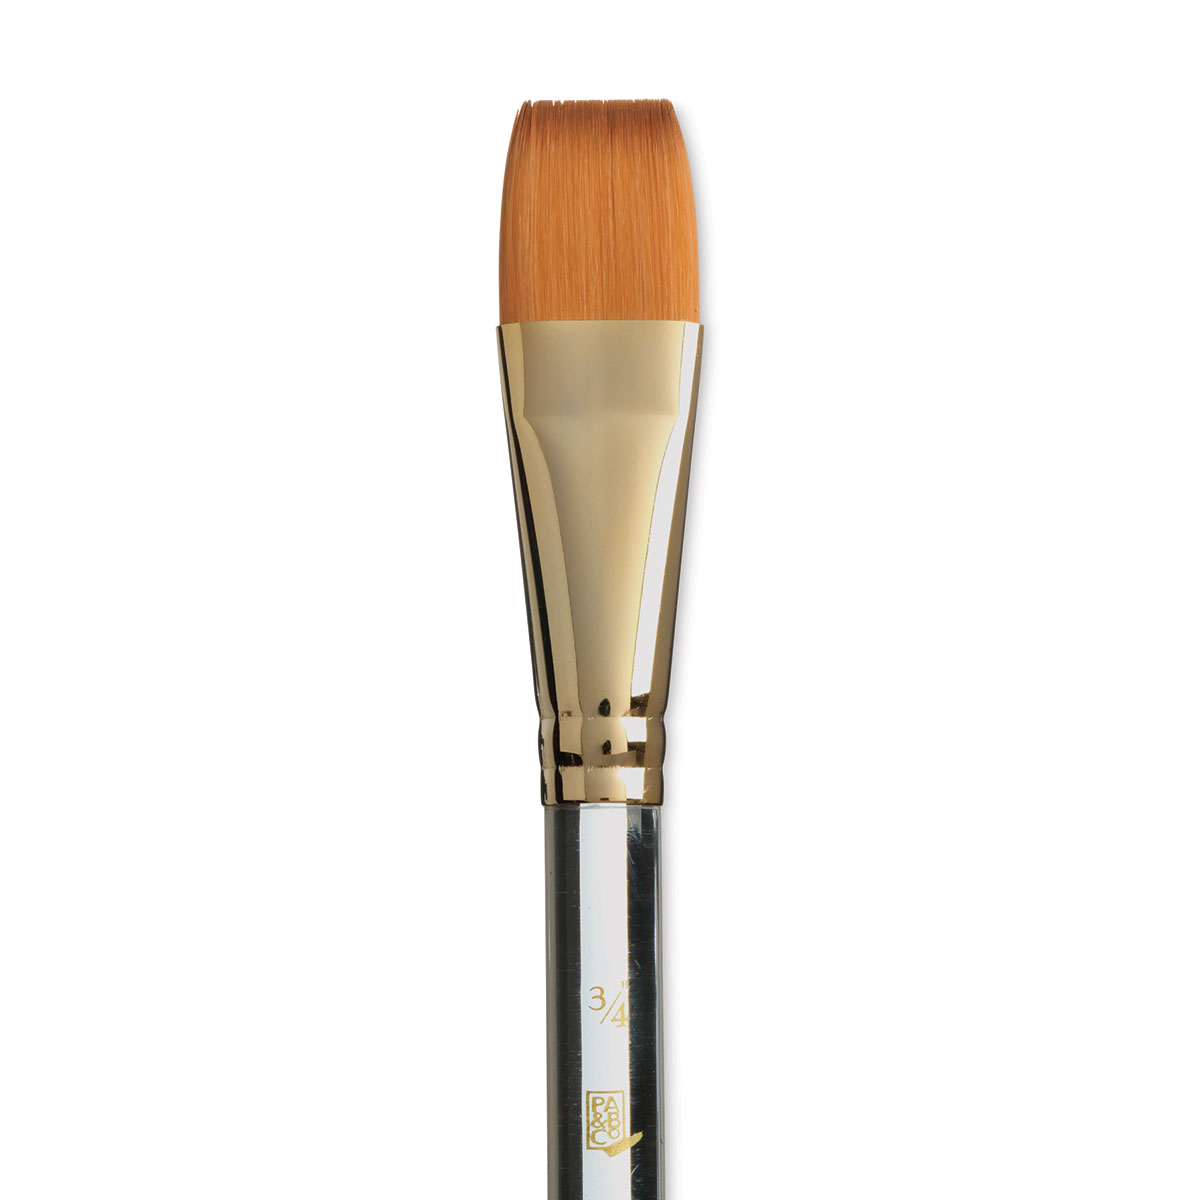 Princeton Series 4050 Heritage Synthetic Sable Brush Set- Blick Exclusive,  Set of 4